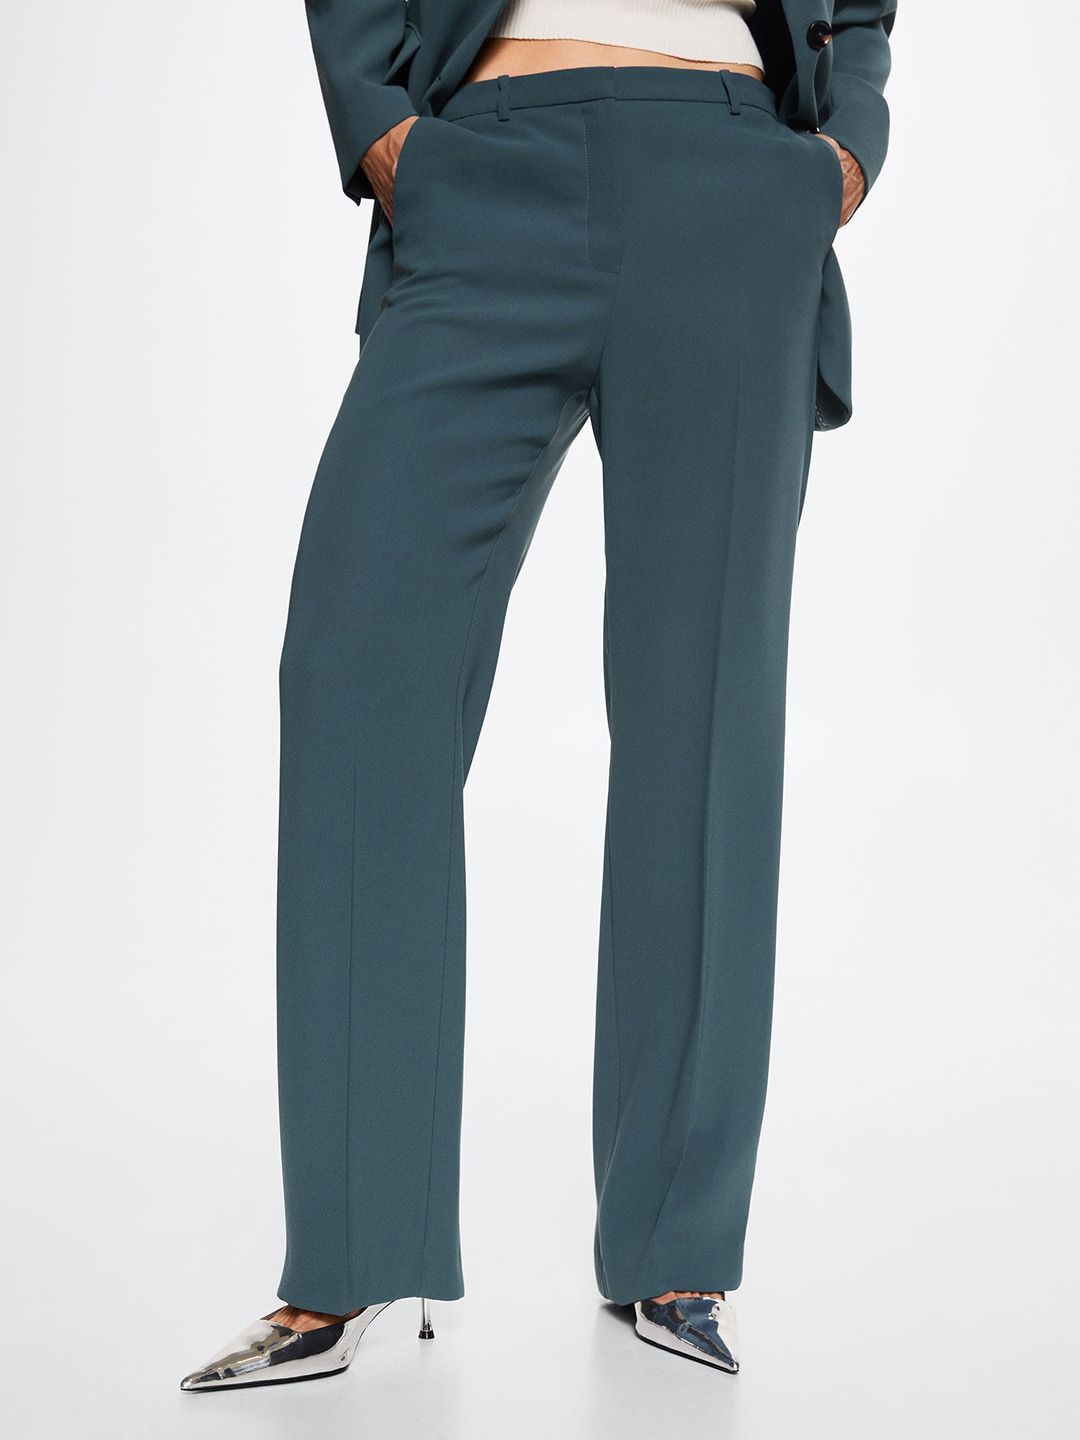 MANGO Women Teal Straight Fit Pleated Sustainable Trousers Price in India